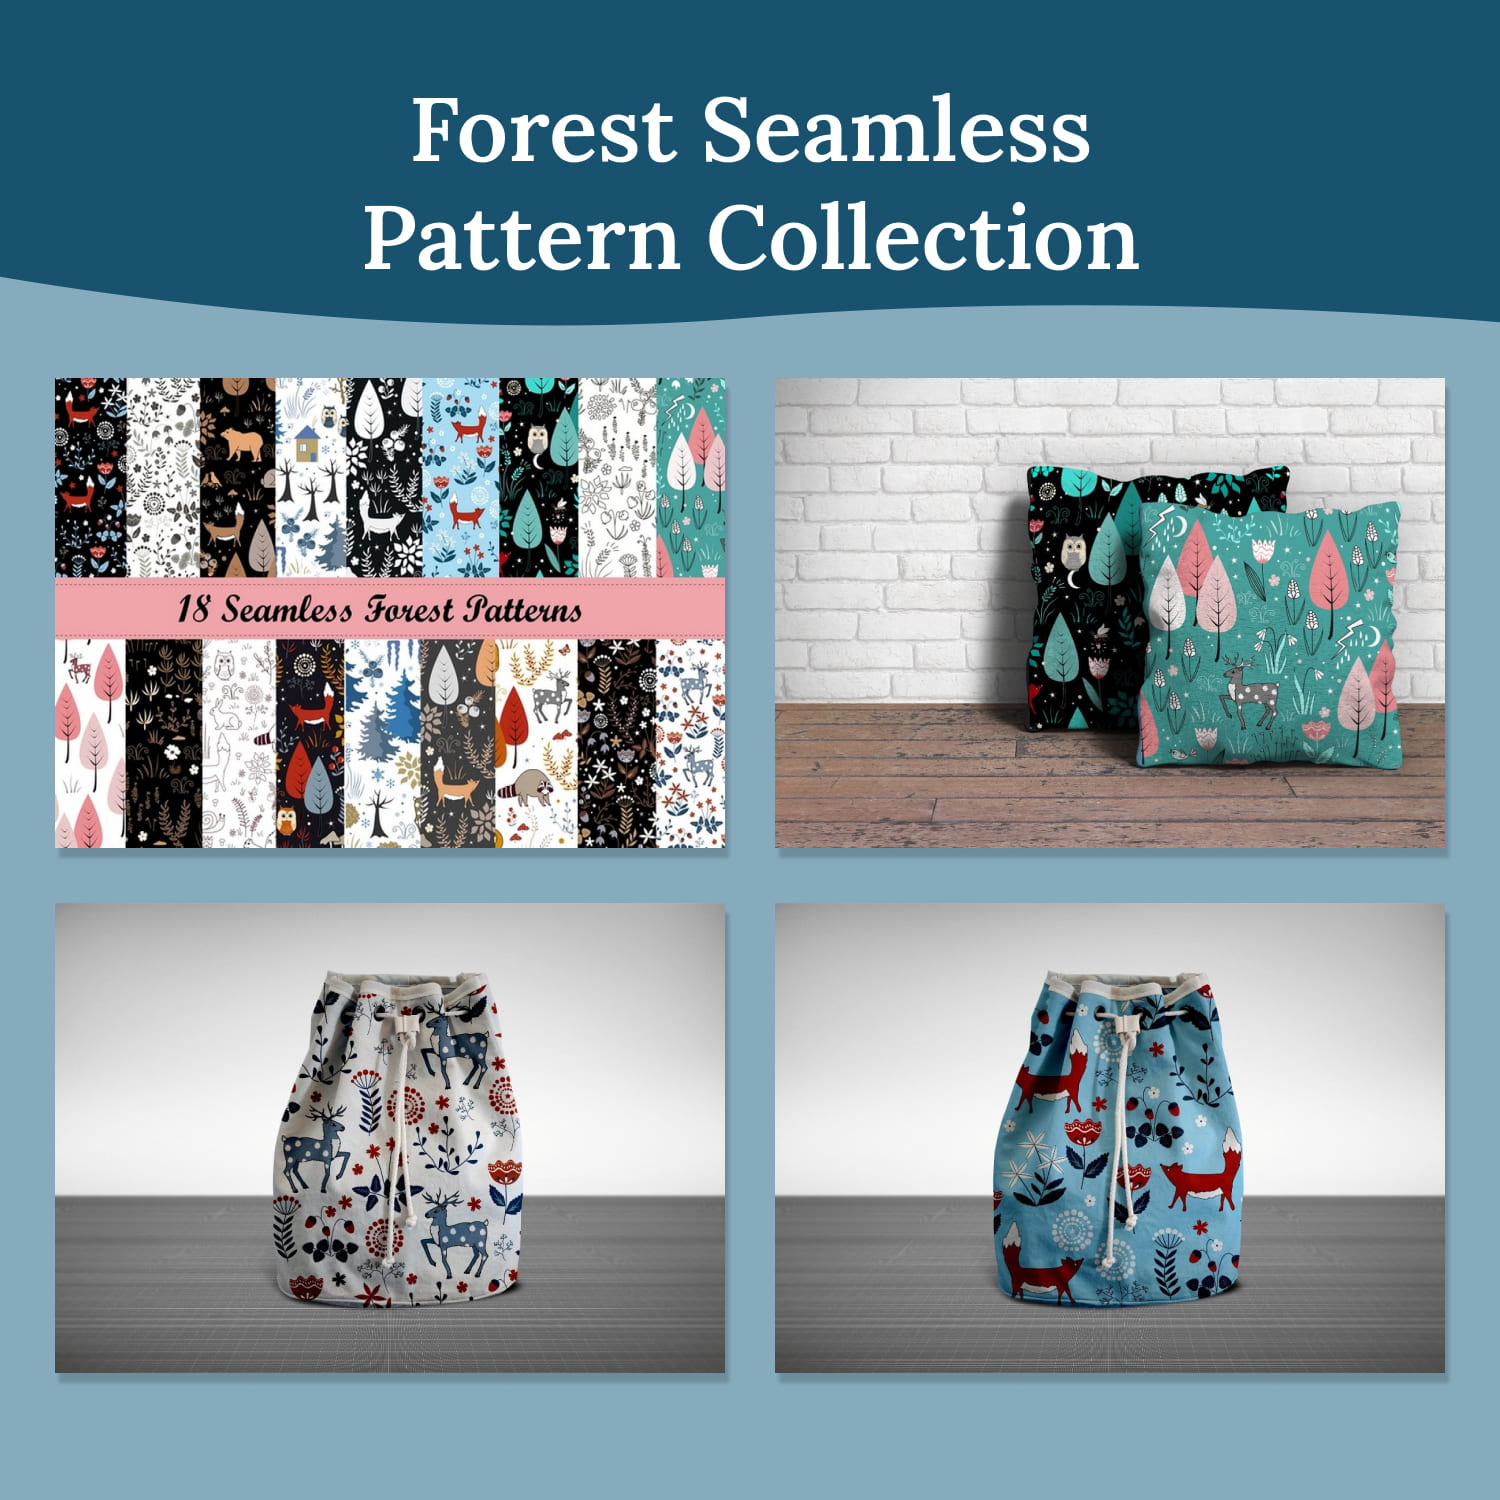 Forest Seamless Pattern Collection 01.